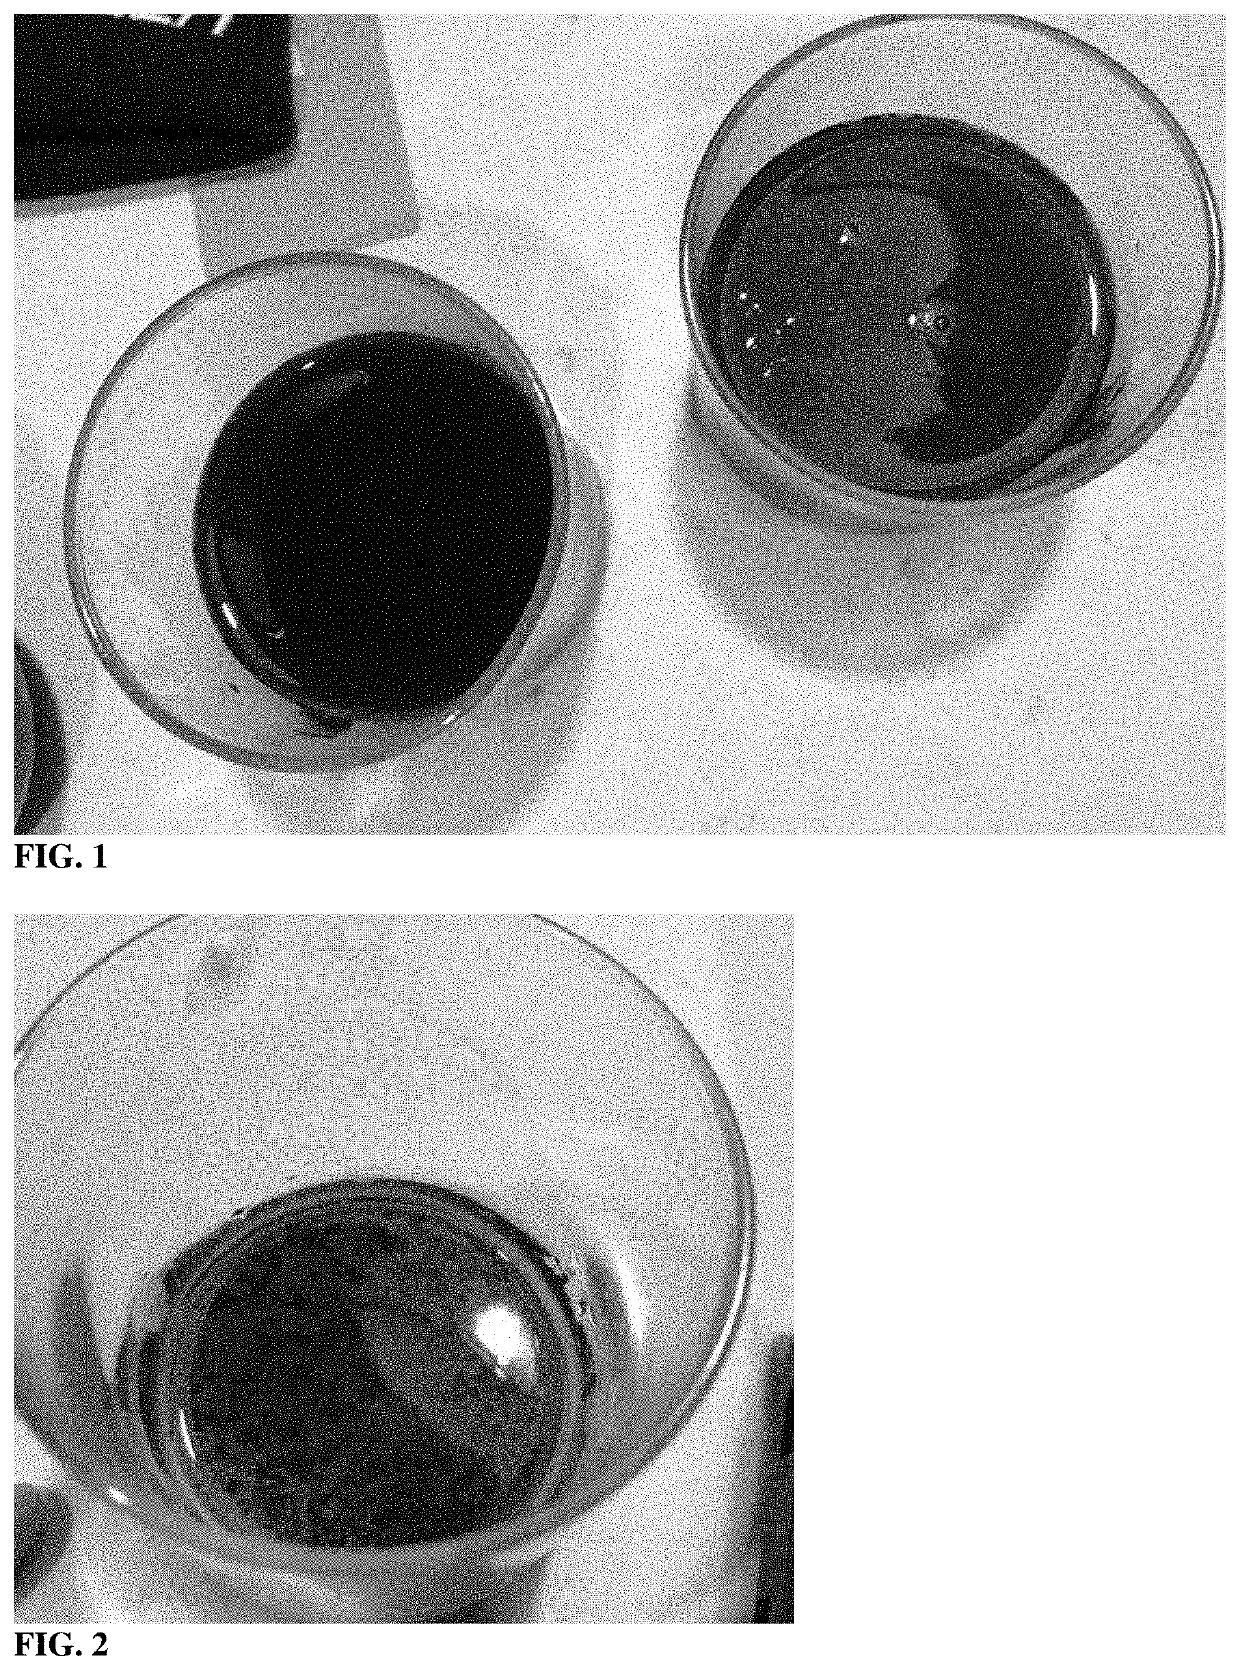 Infusion of emulsified hydrophobic active ingredients into high polyphenolic beverages